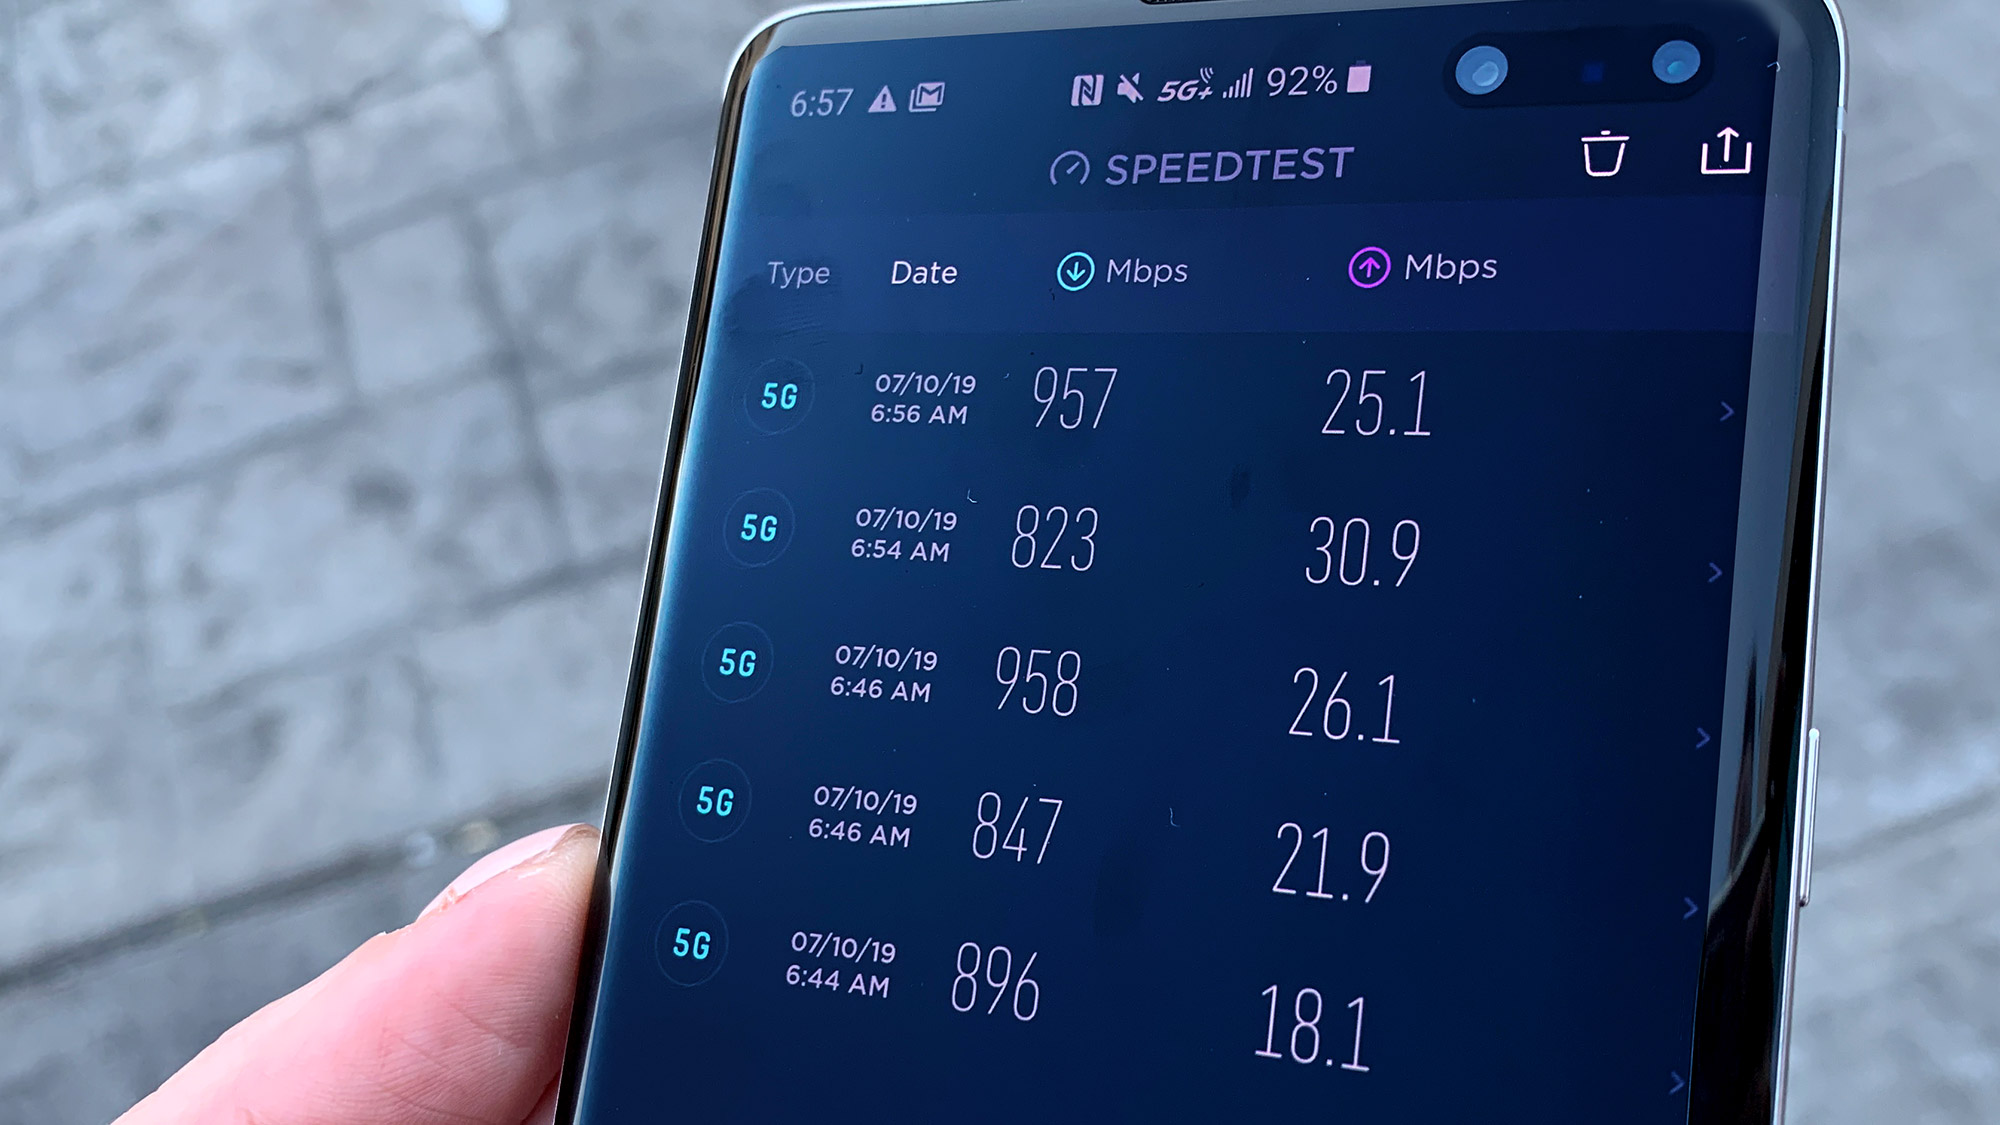 Image showing 5G speed results on the Speedtest app